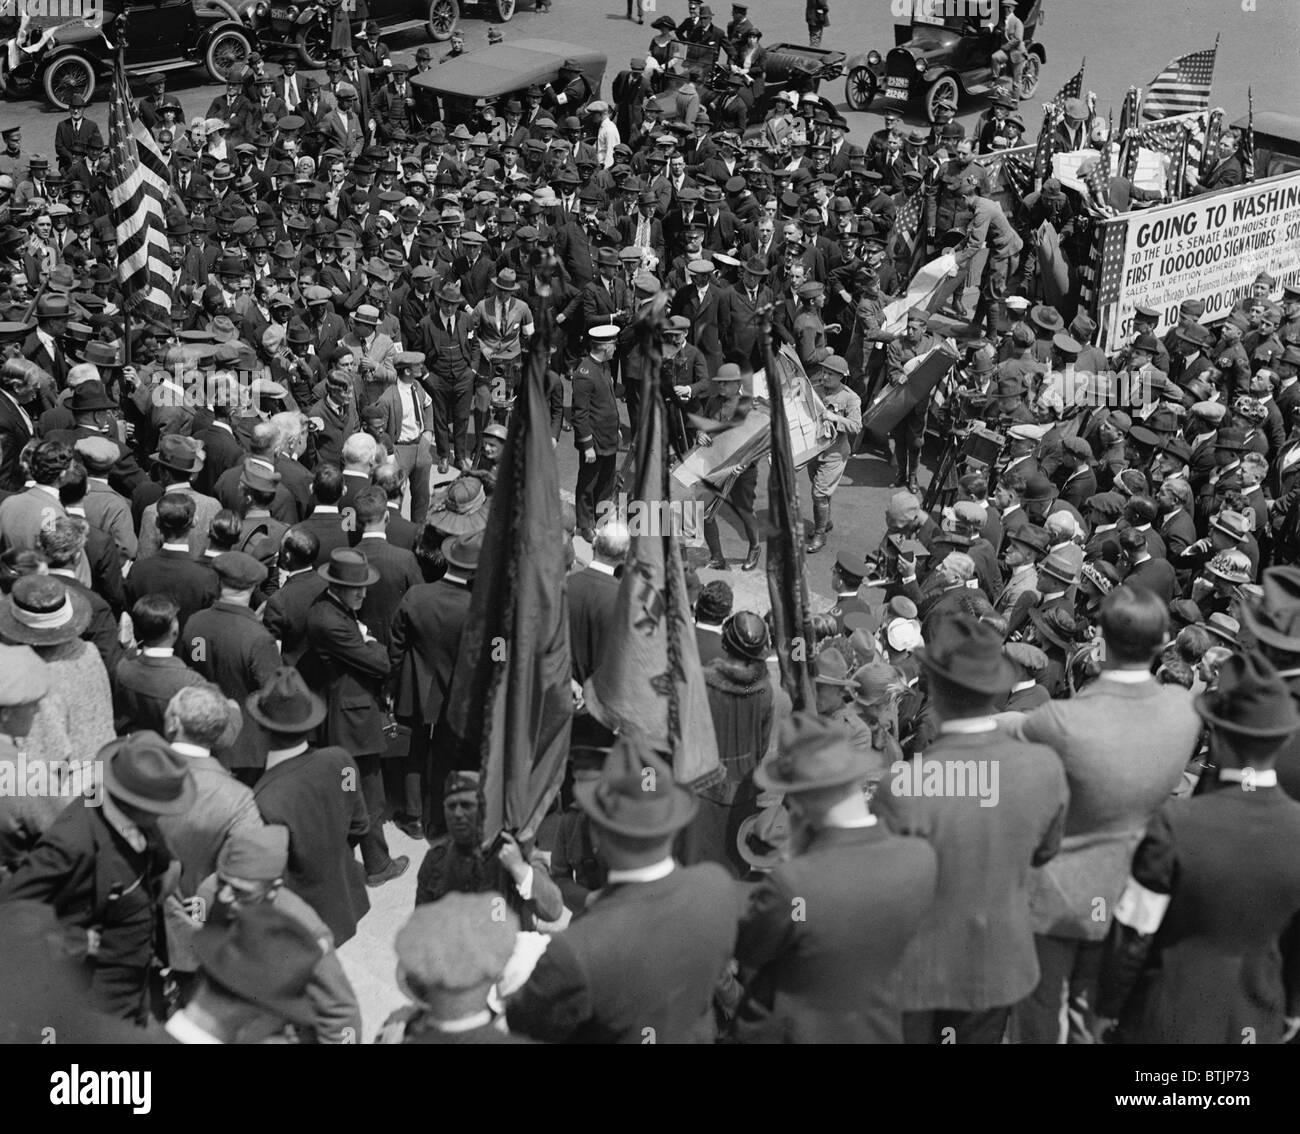 The Bonus March. 1922 demonstration by World War I veterans for government bonuses. In 1924 Congress voted to provide veterans Adjusted Compensation certificates, or bonuses, which were not scheduled for full payment until 1945. Stock Photo